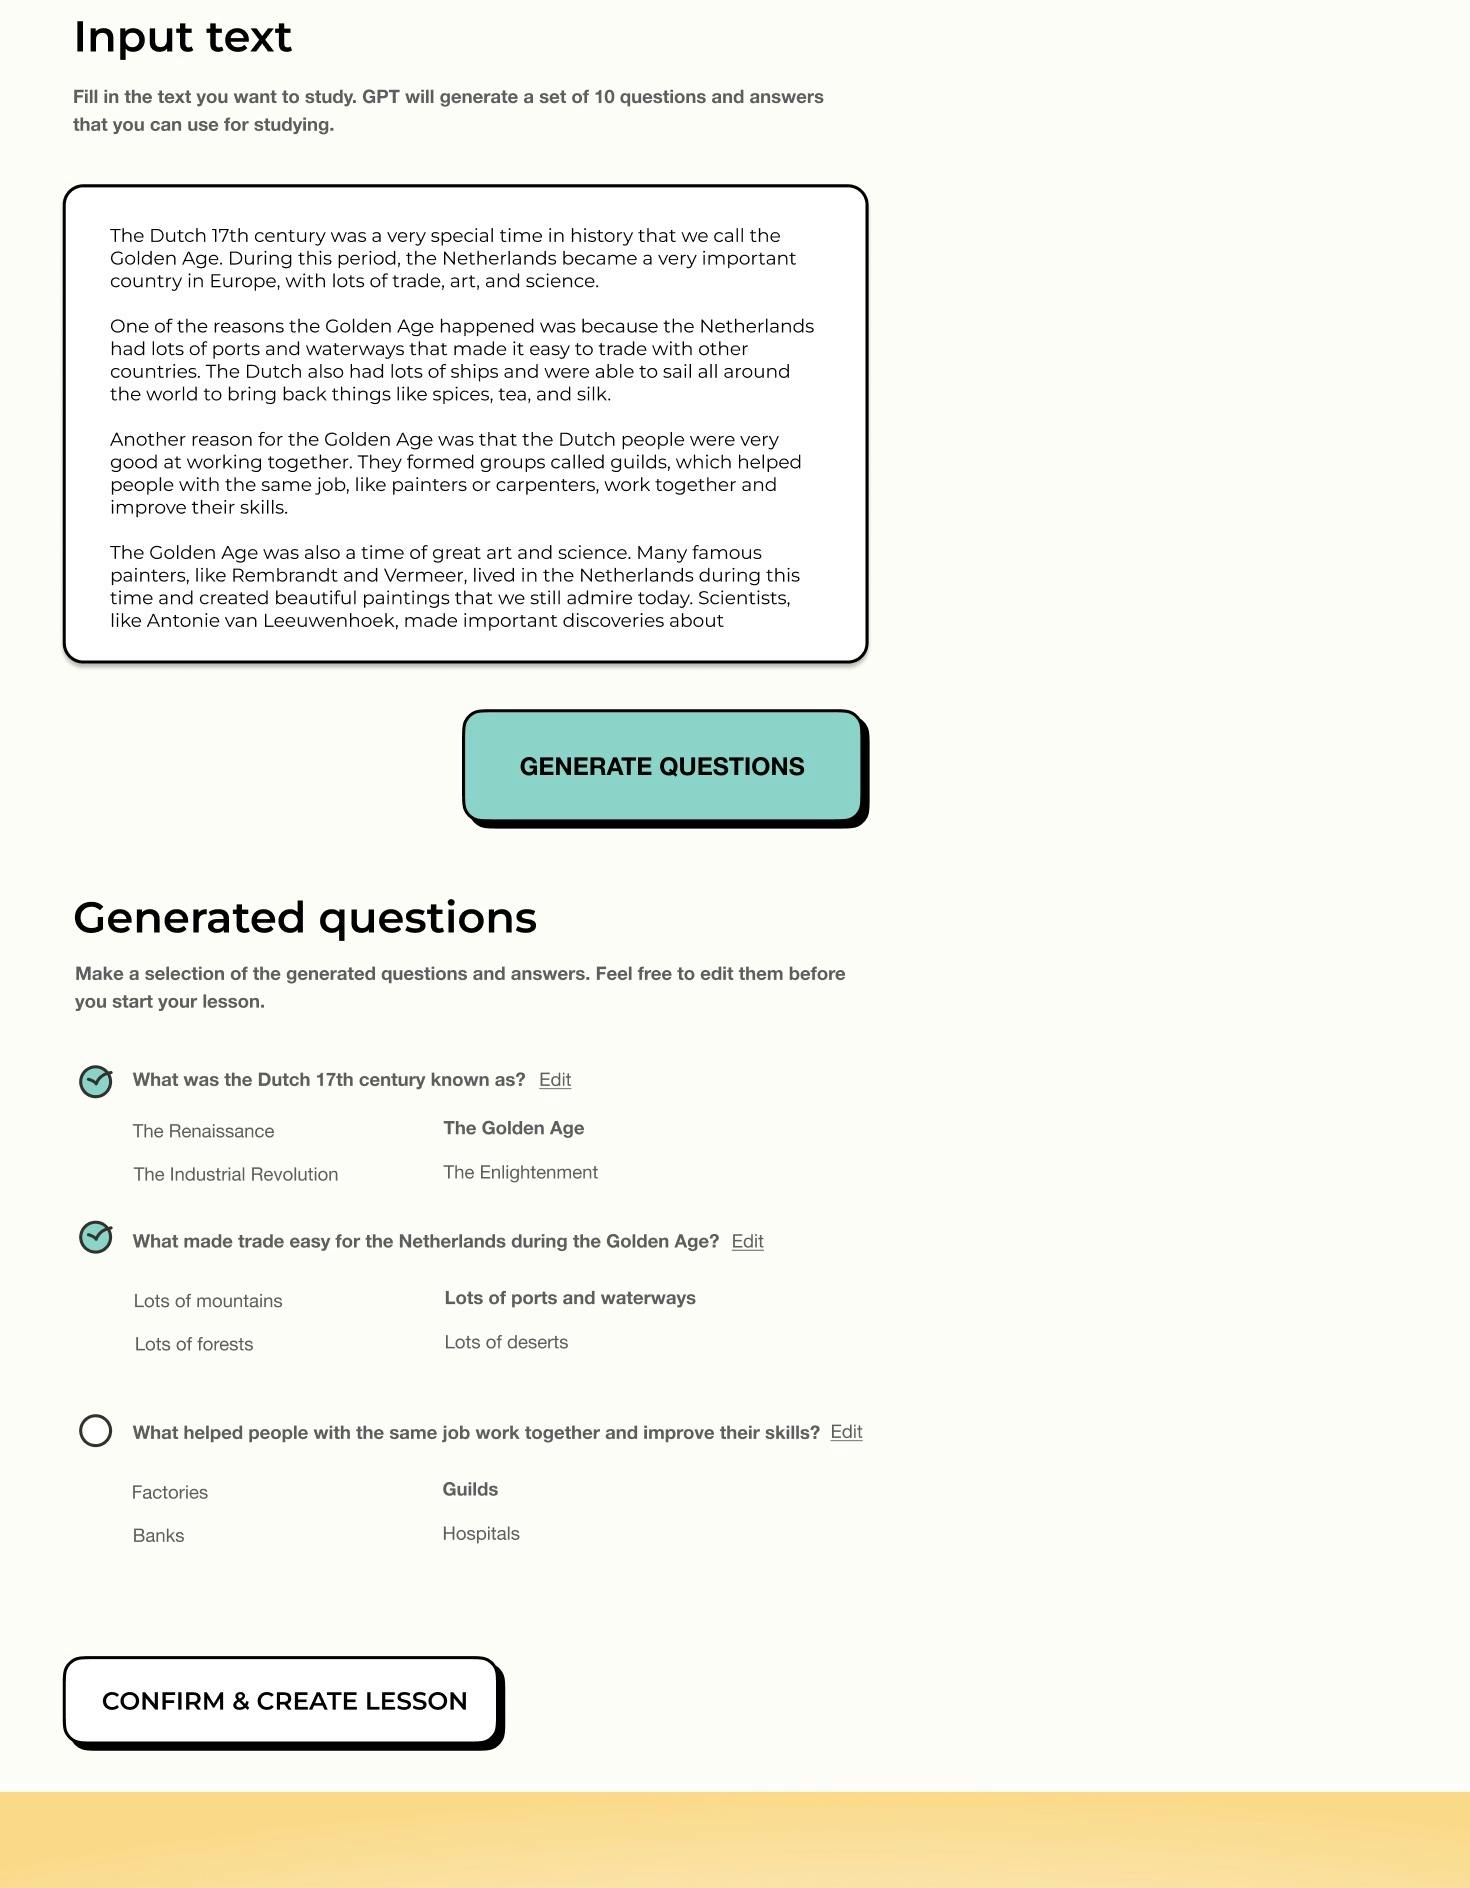 Screenshot of the app after generating questions